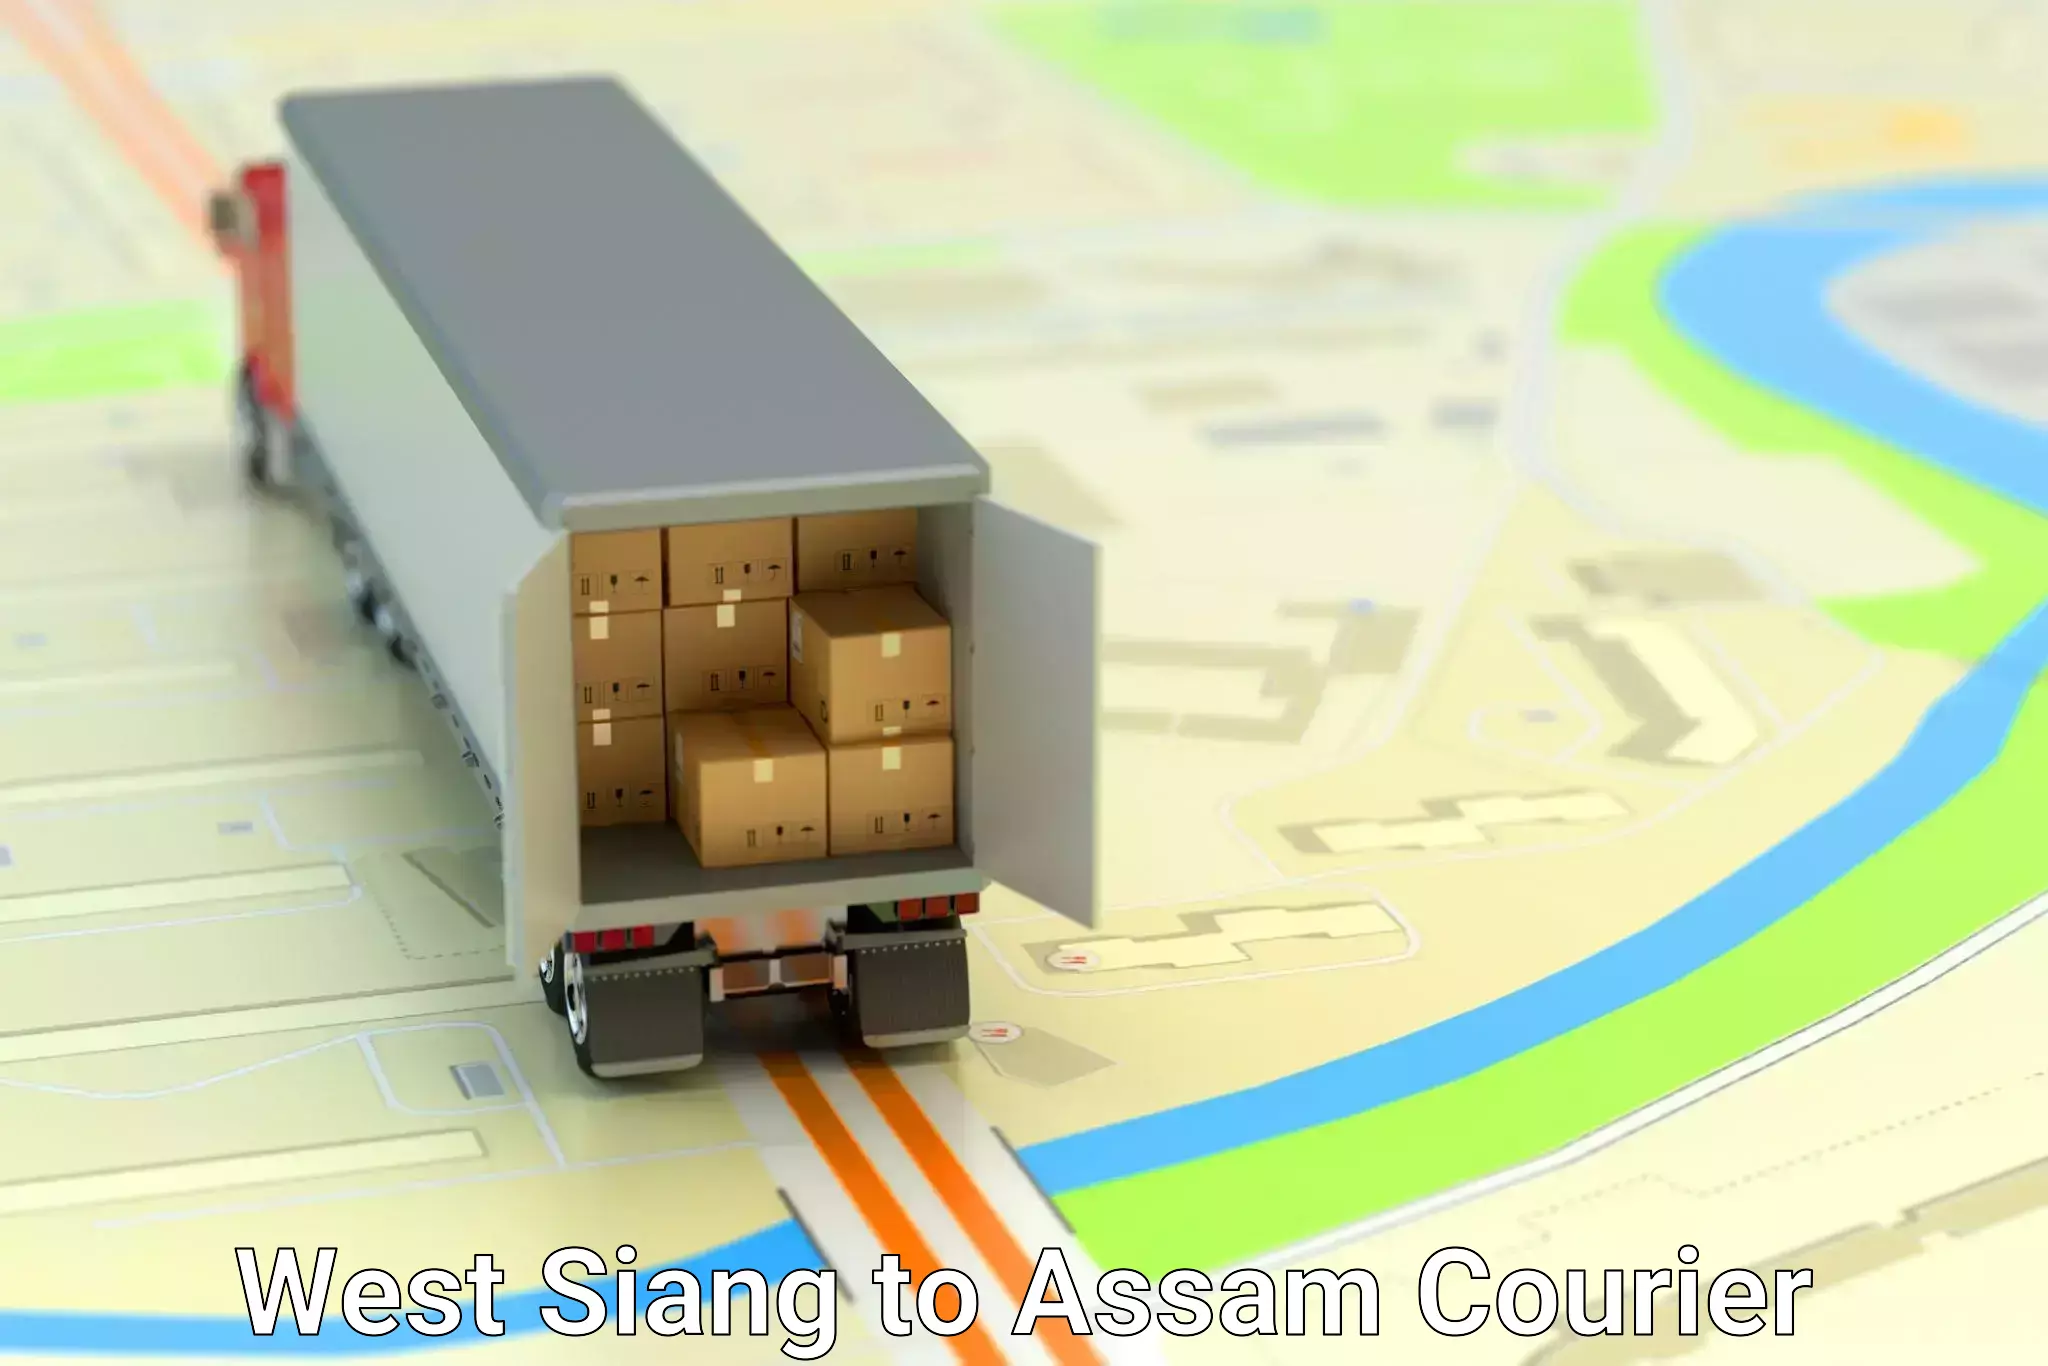 Global logistics network West Siang to Assam